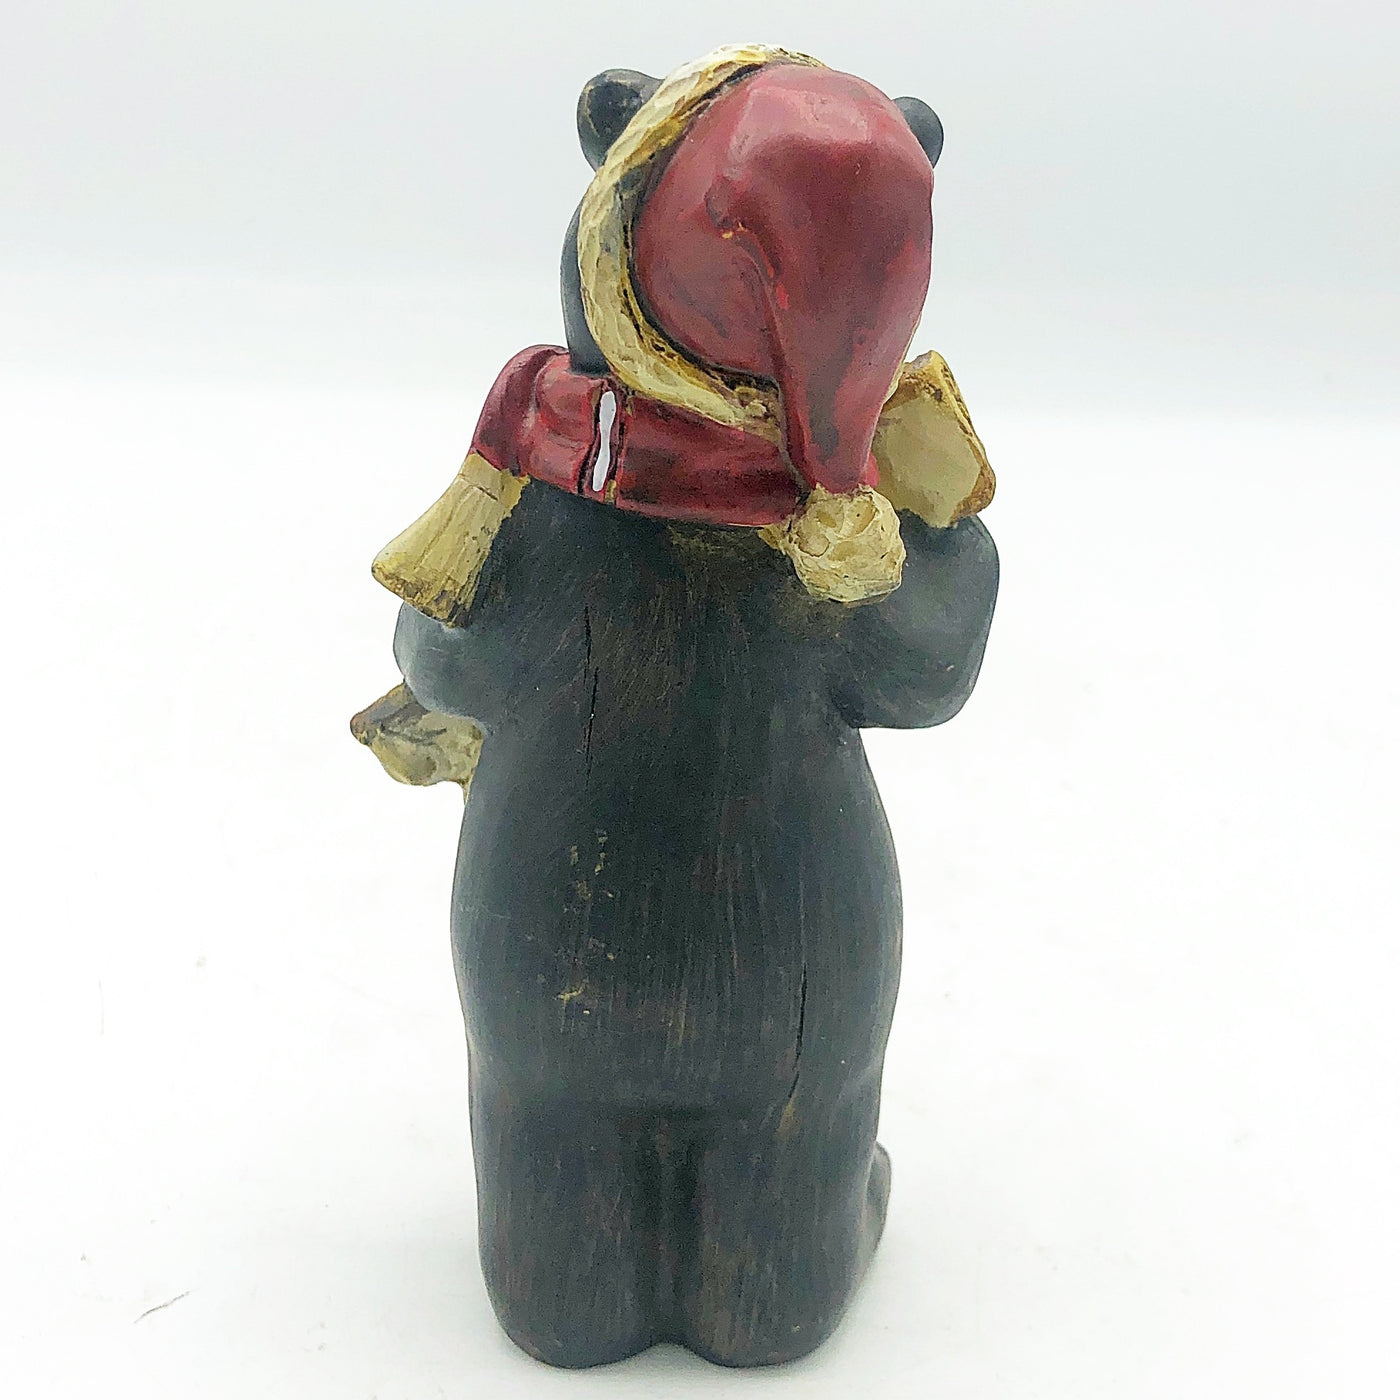 💙 Black Bear with Peace Banner 5.5" Resin Figure